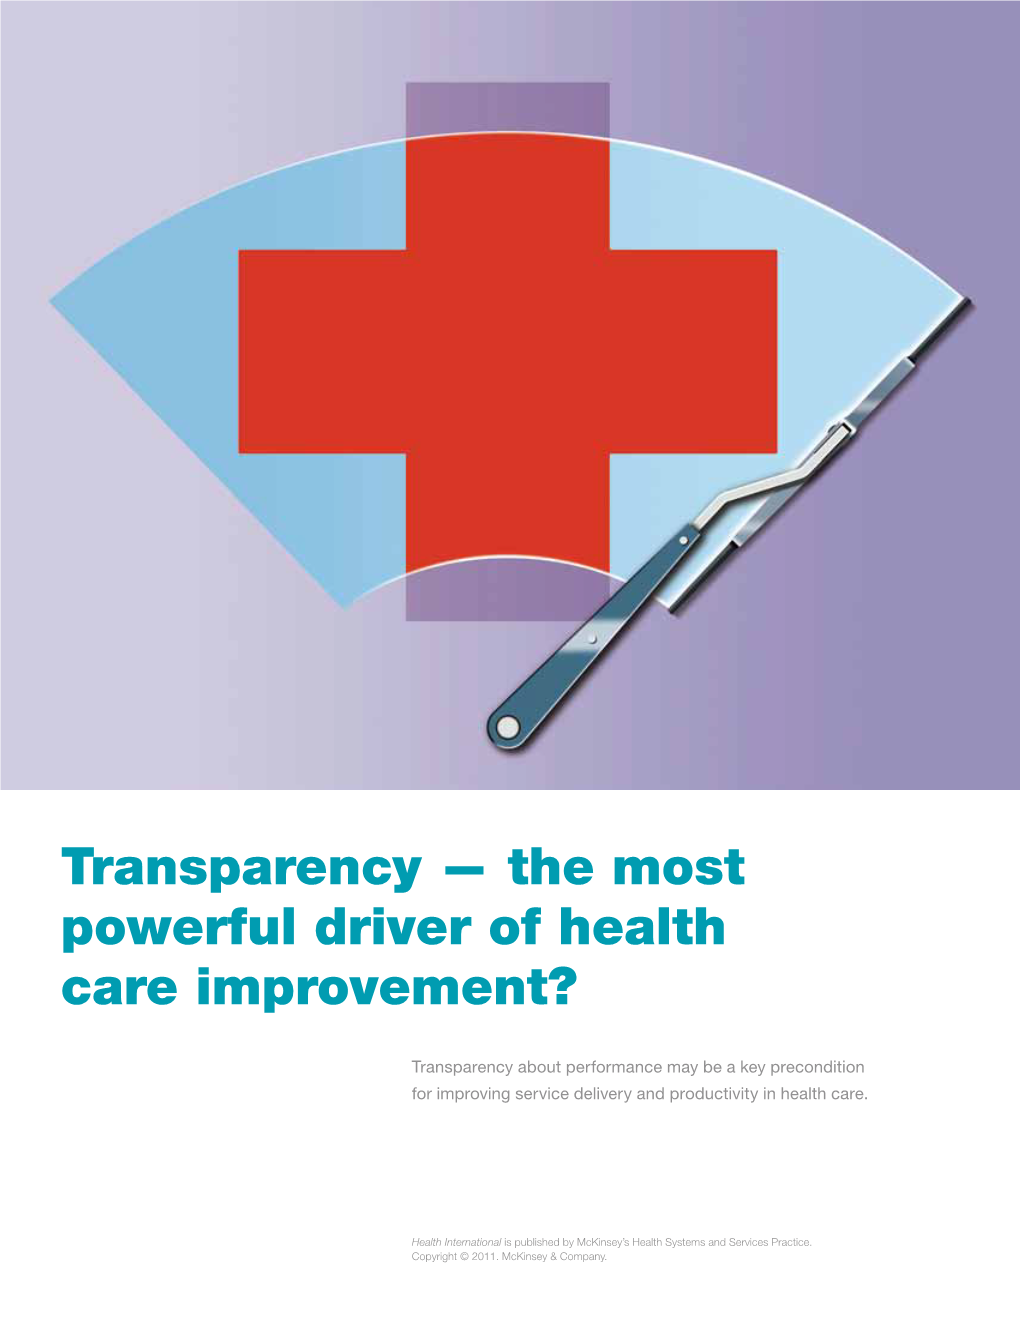 Transparency — the Most Powerful Driver of Health Care Improvement?